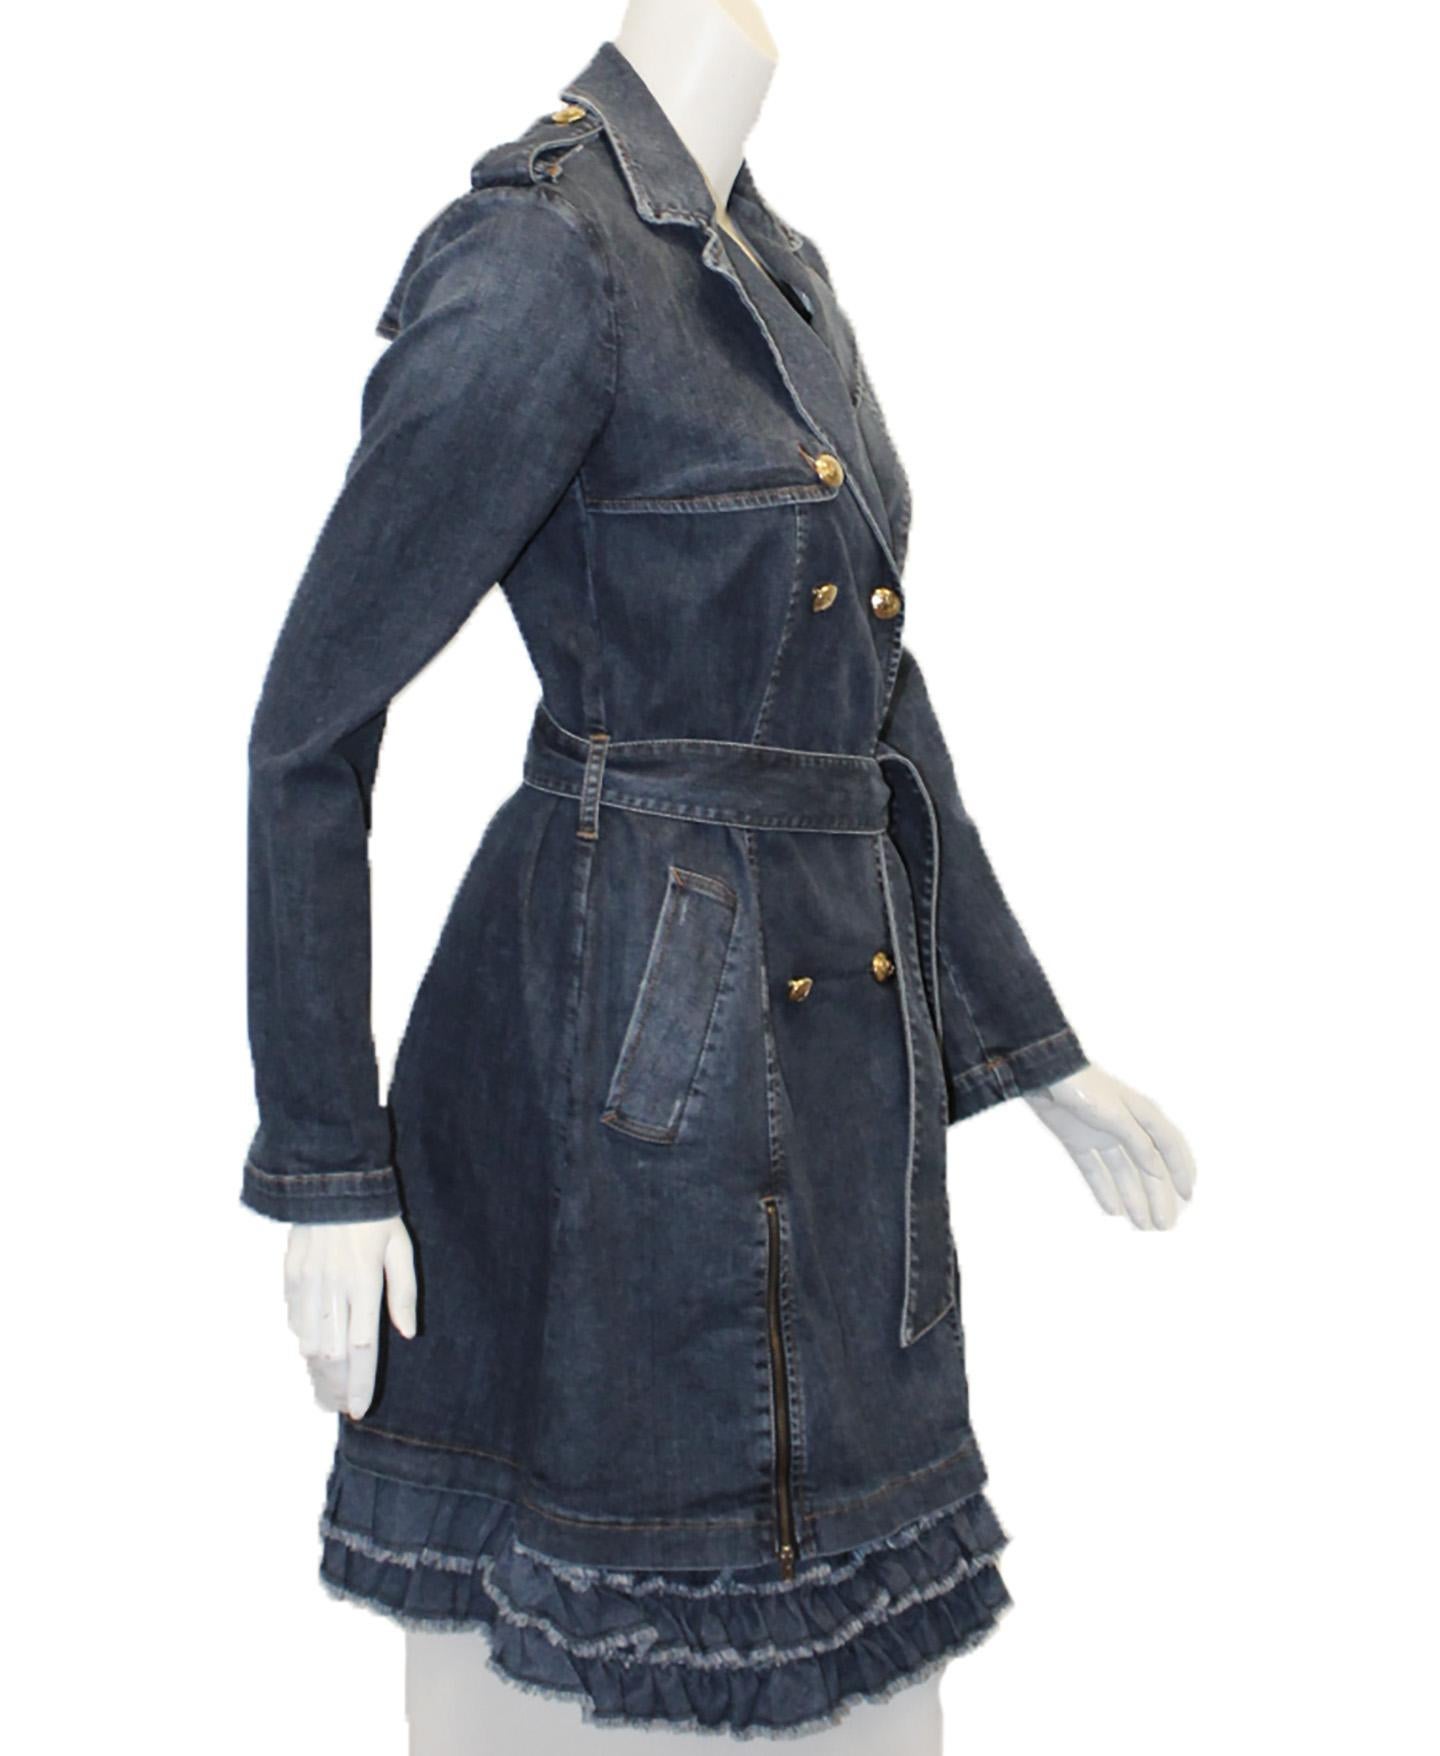 Love Moschino blue denim long sleeve double breasted dress coat is enhanced on the shoulders with epaulets and includes 6 gold tone Love Moschino buttons and one sash at the waist for closure.  As added decorations two zippers at front just below